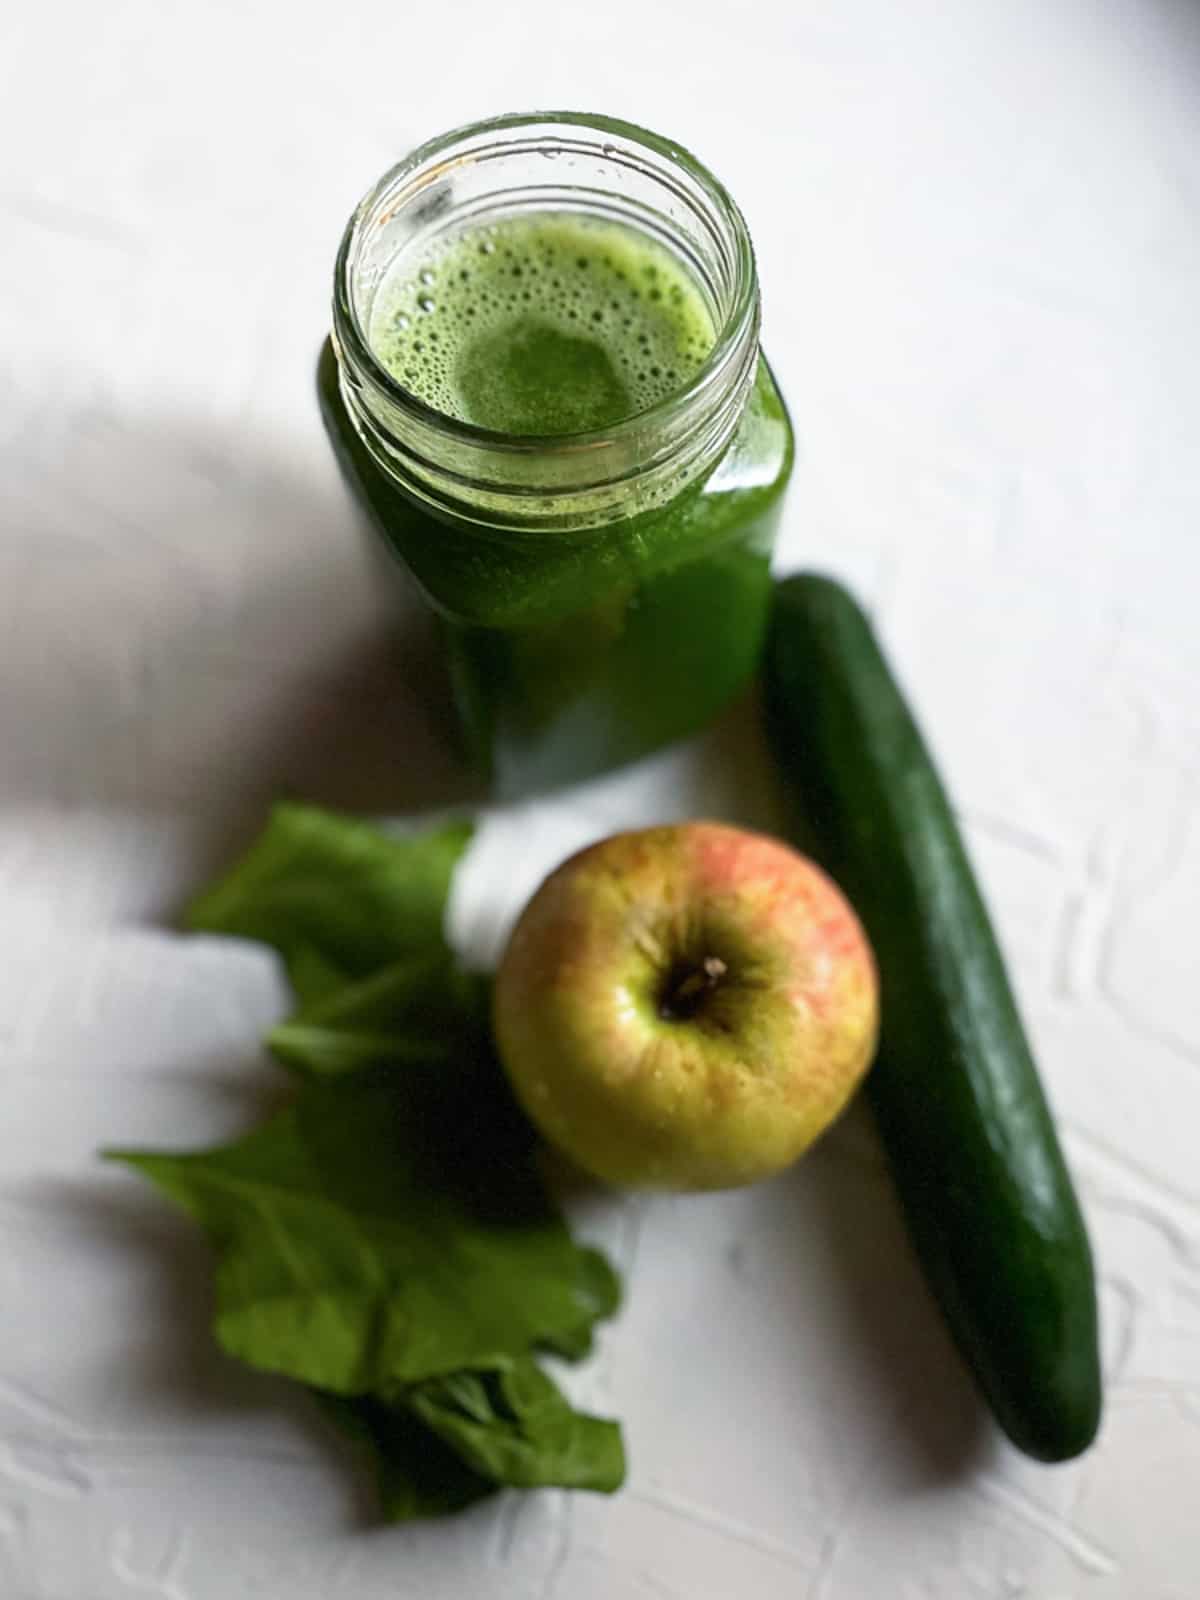 Spinach juice with spinach apple and cucumber on the fore background.